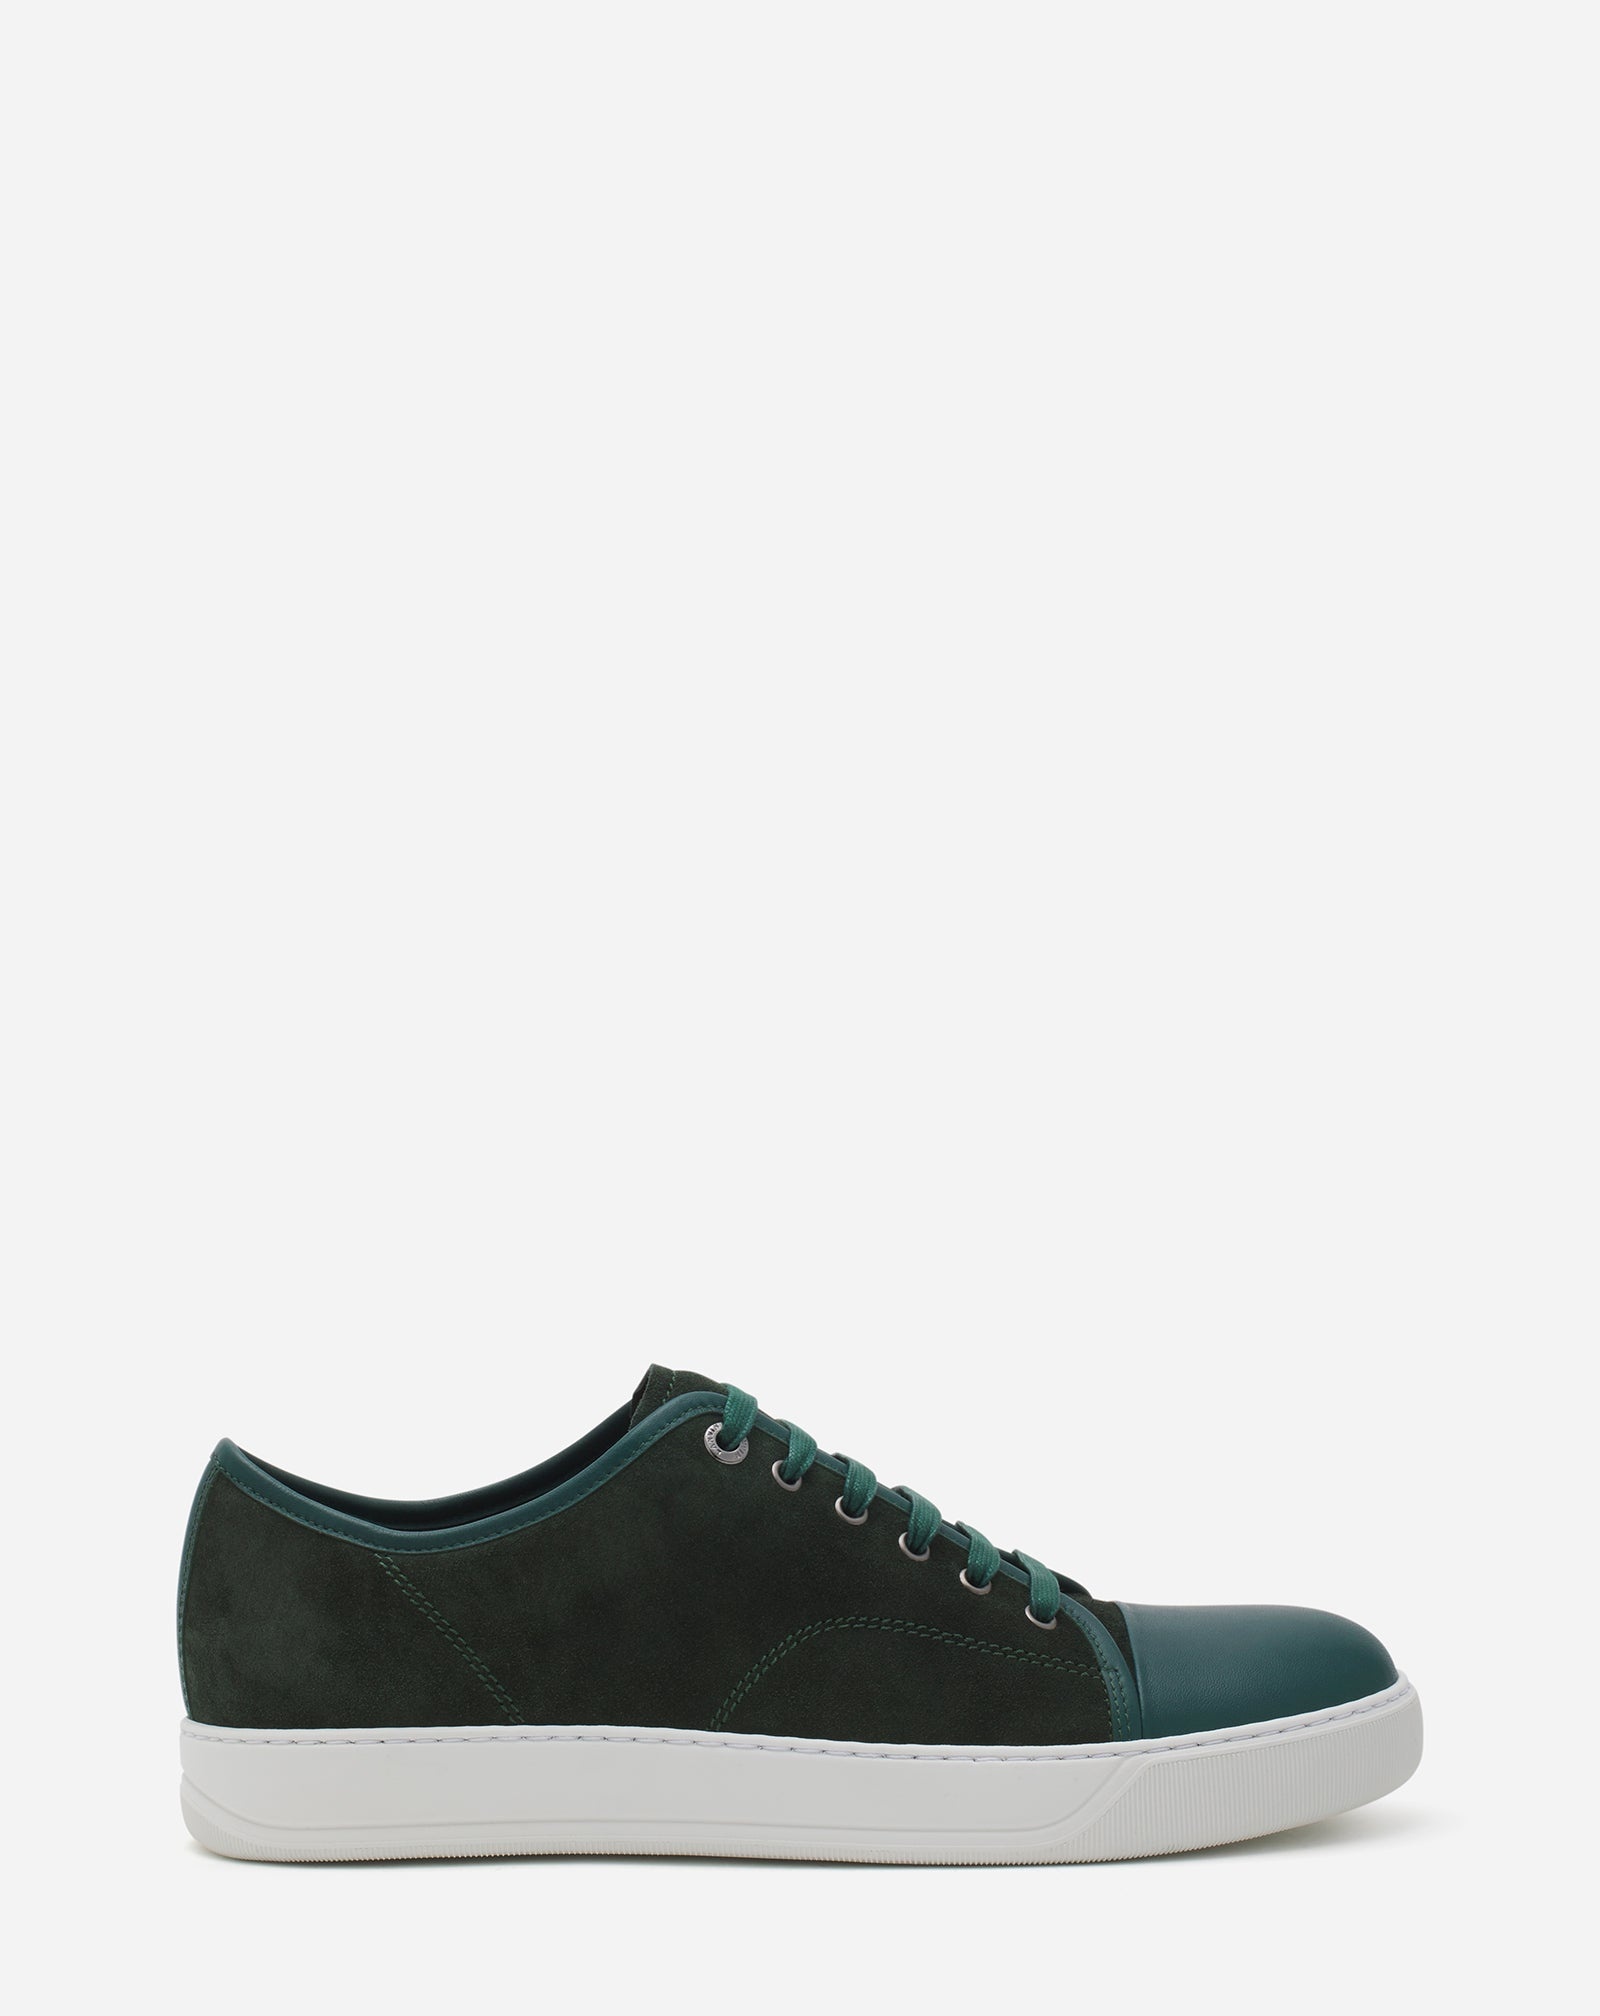 DBB1 LEATHER AND SUEDE SNEAKERS - 1